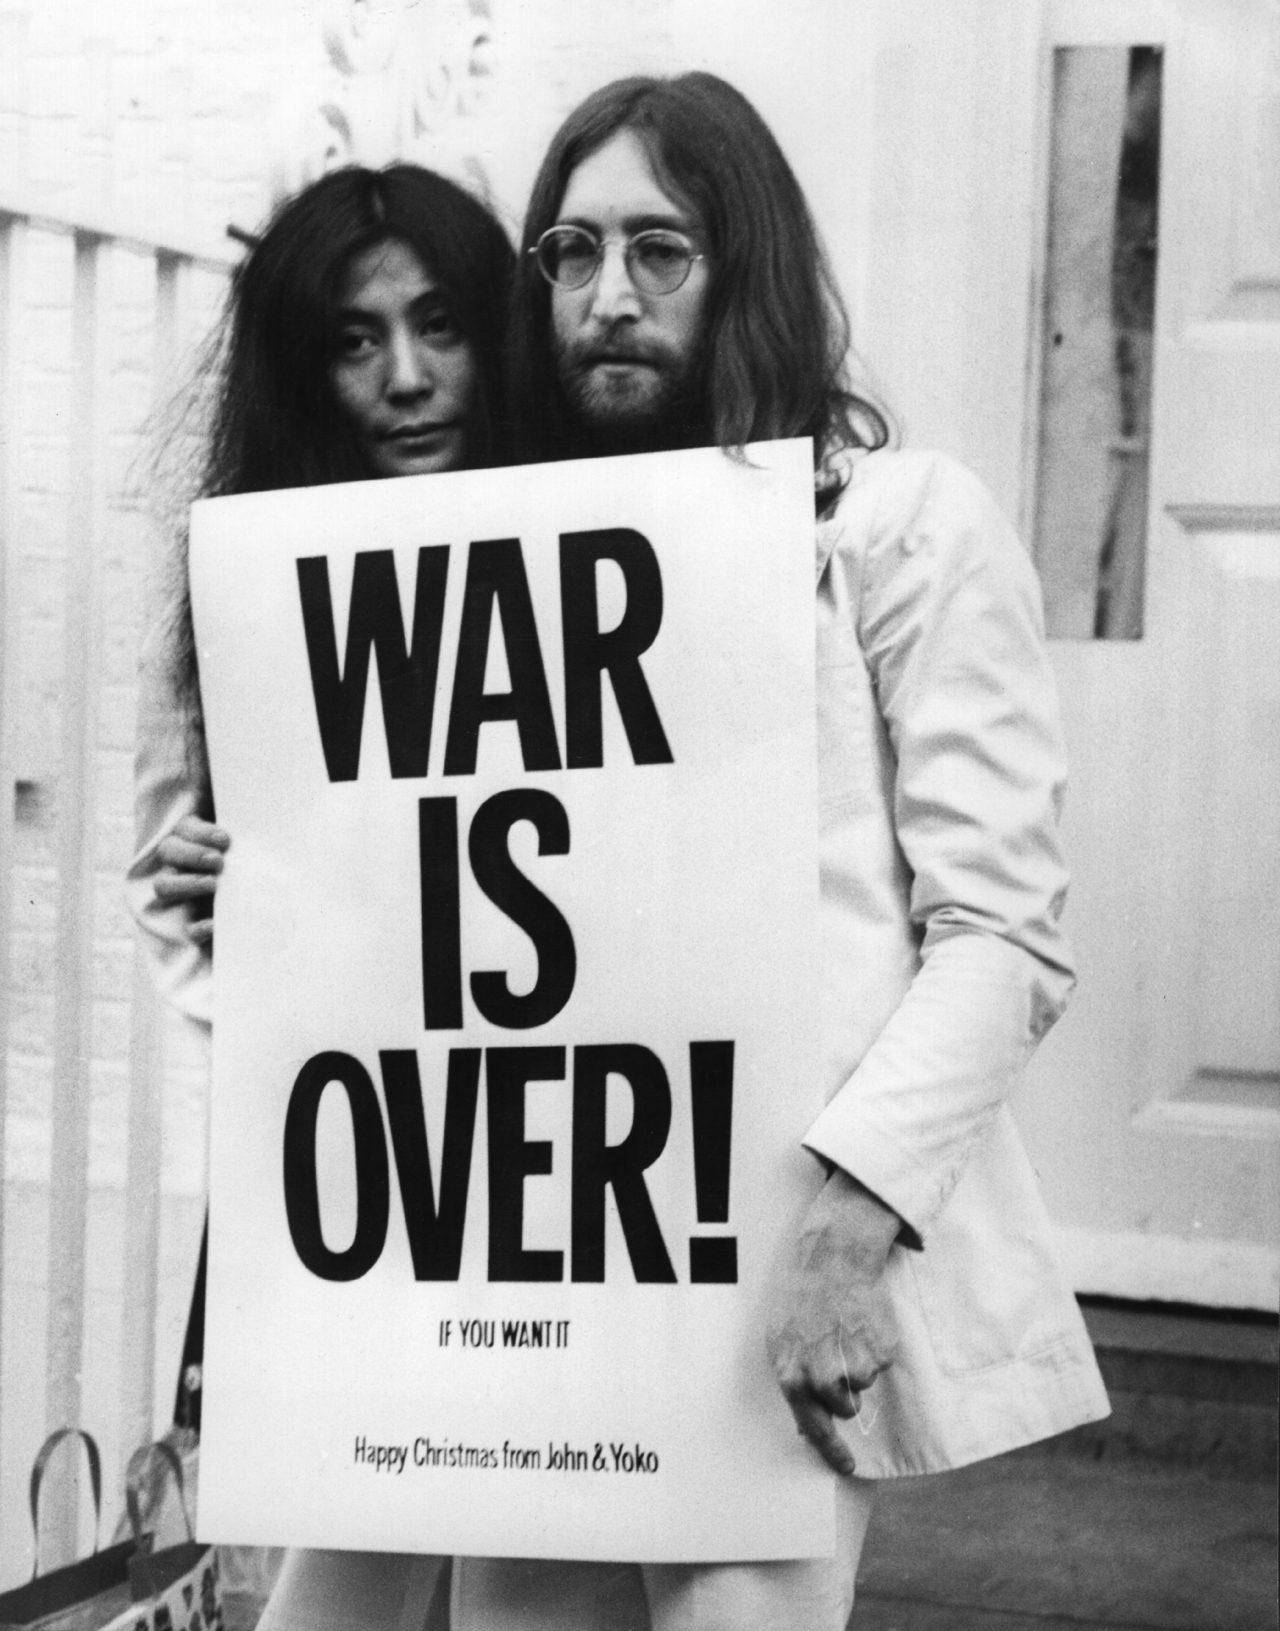 John Lennon (1940 - 1980) and Yoko Ono pose on the steps of the Apple building in London, holding one of the posters that they distributed to the world's major cities as part of a peace campaign protesting against the Vietnam War. 'War Is Over, If You Want It'. (Photo by Frank Barratt/Getty Images)